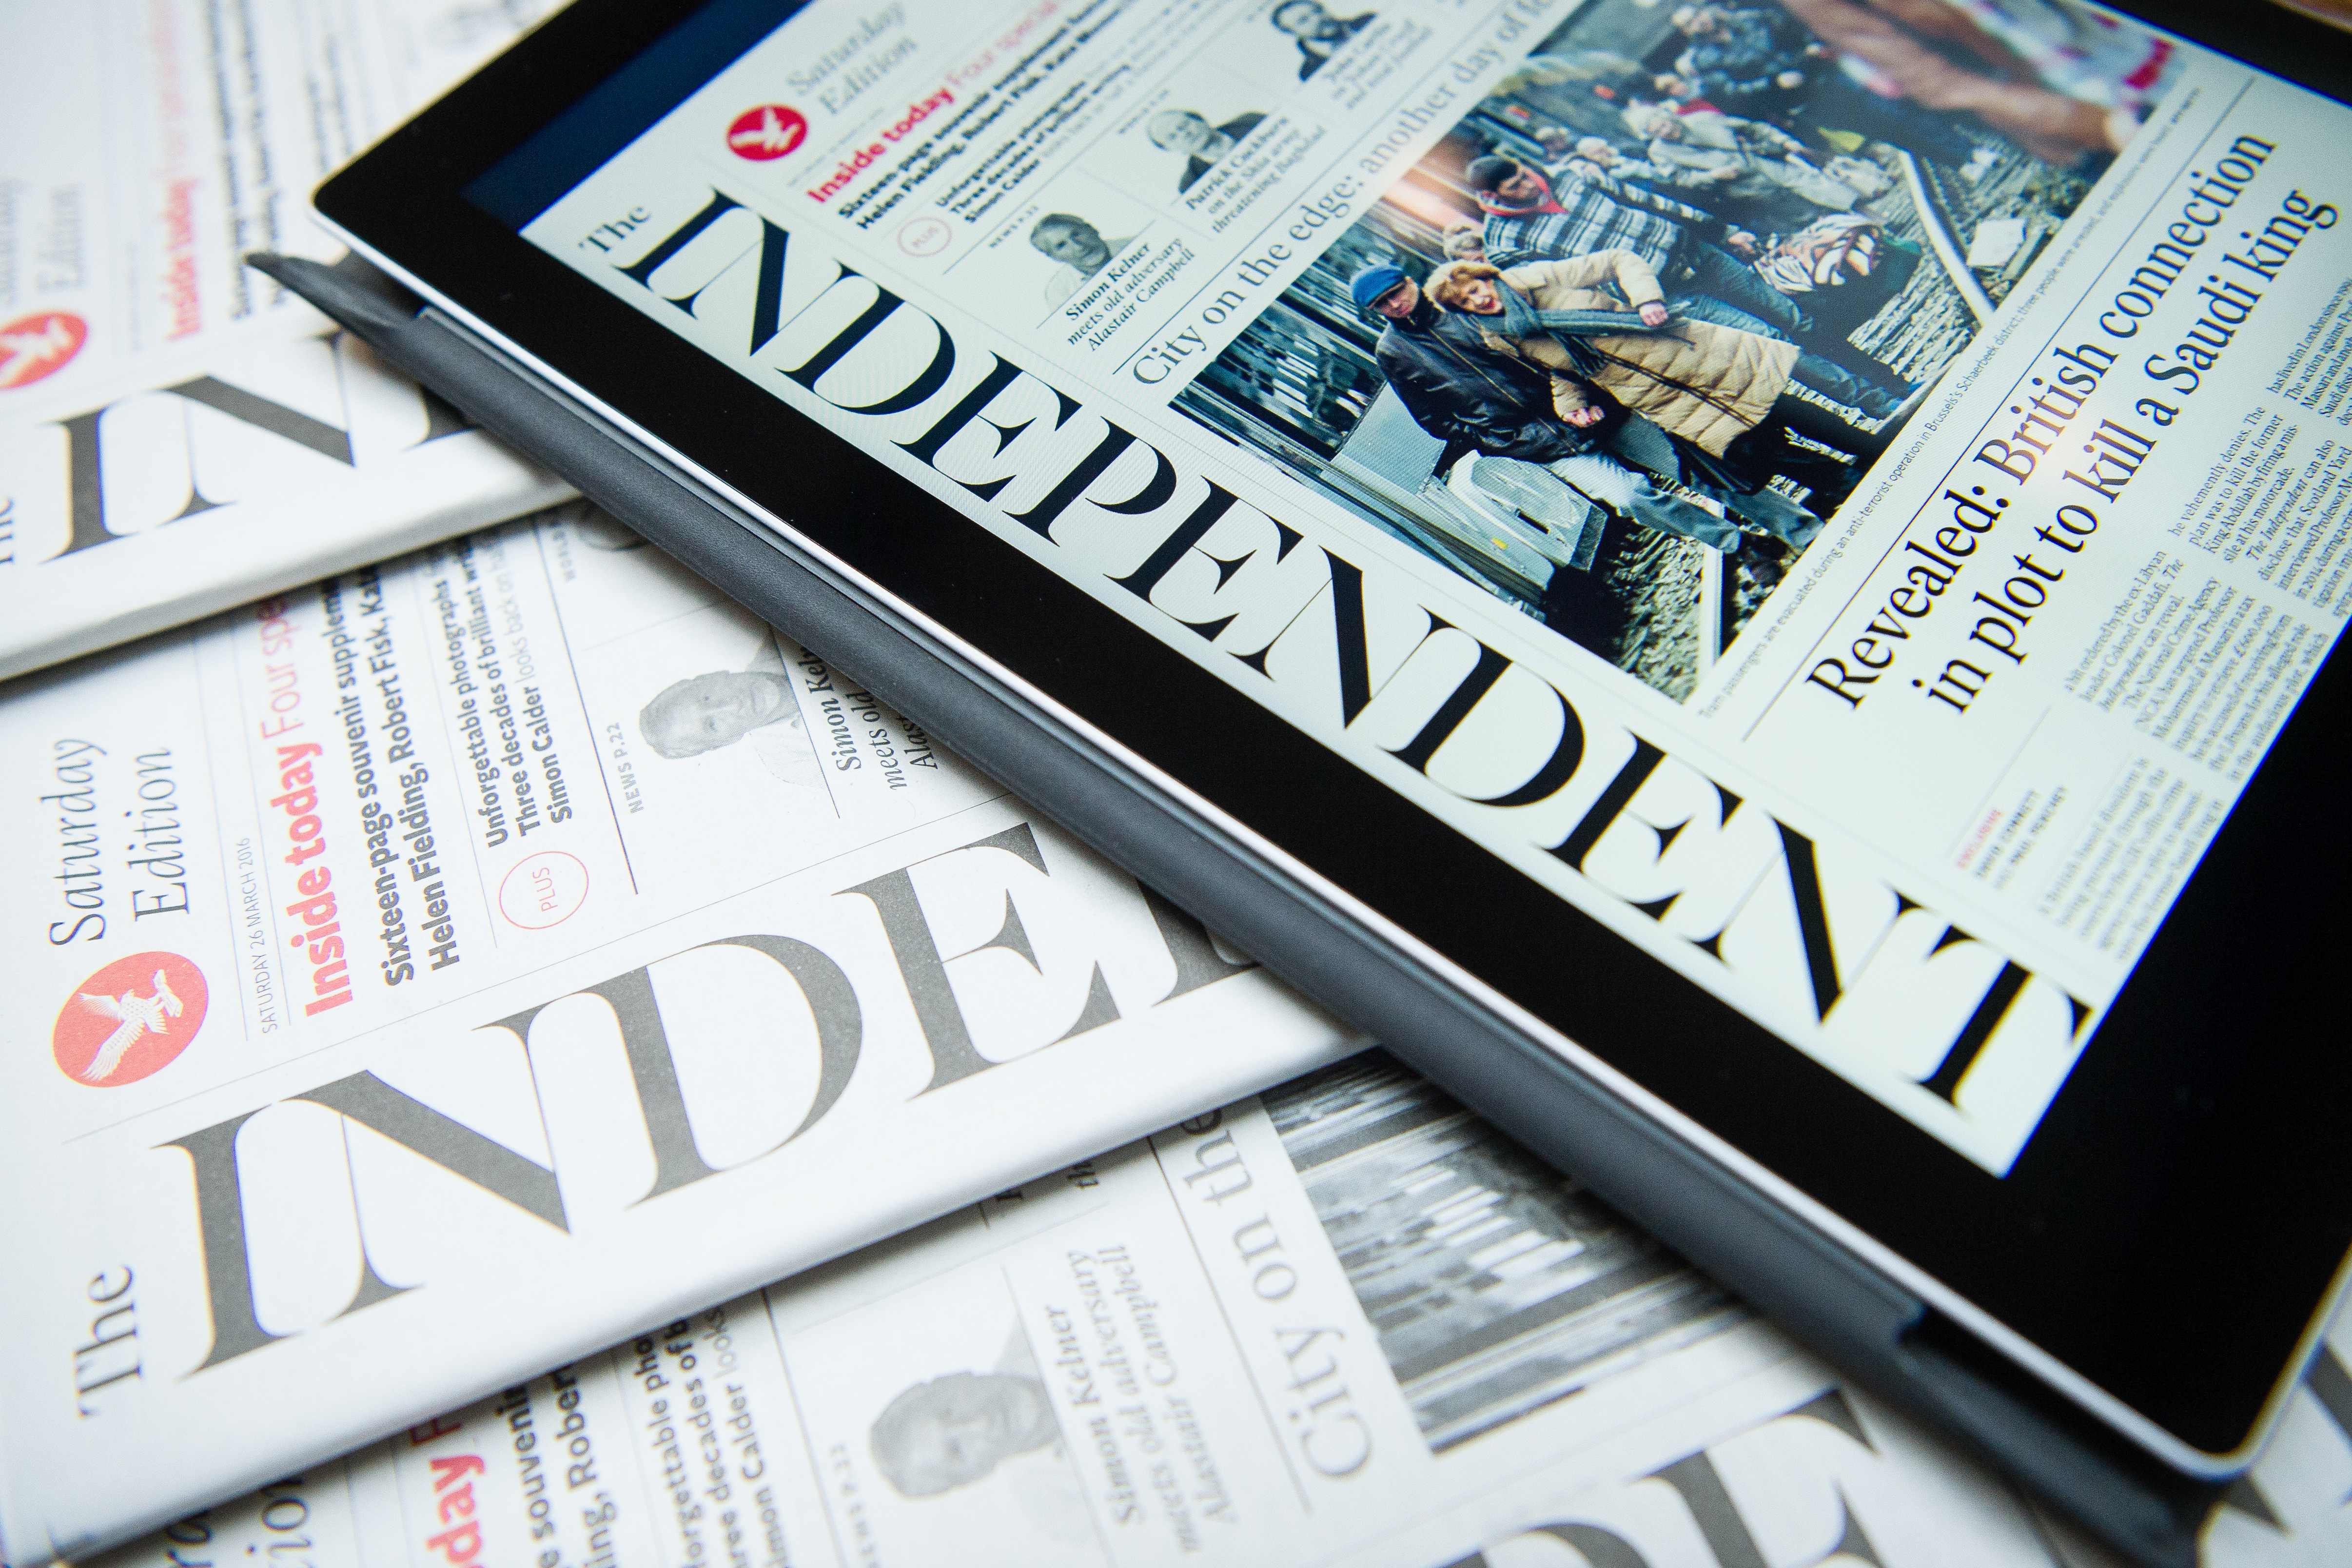 The Independent is celebrating 35 years of journalism